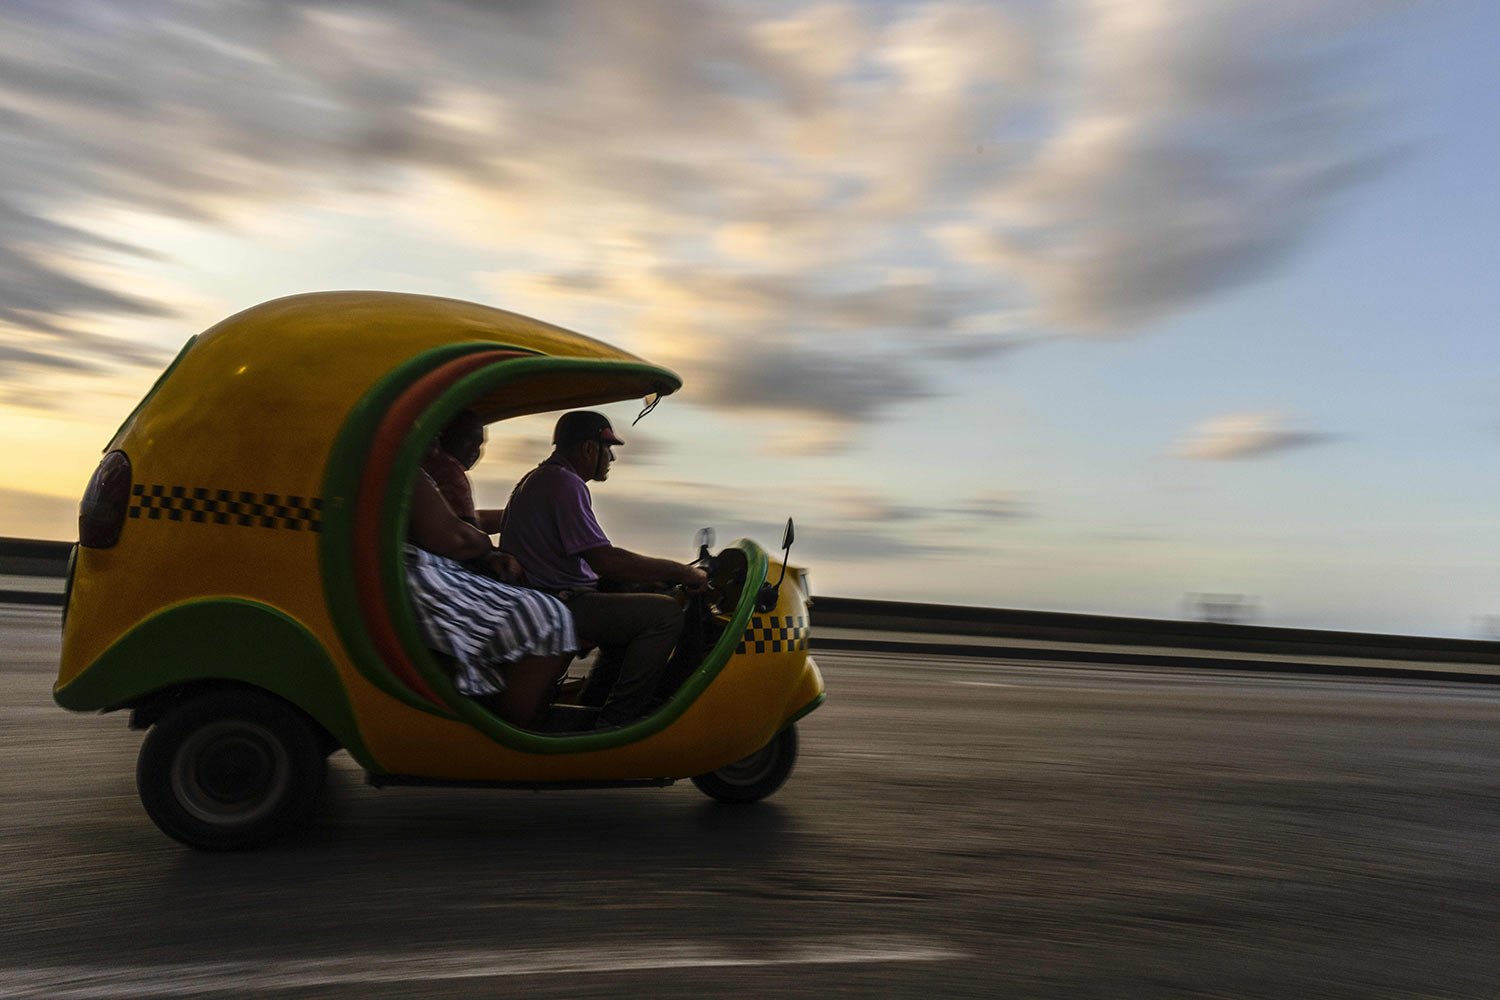  Residents use a Coco taxi that’s normally used by tourists in Havana, Cuba, April 6, 2023. (AP Photo/Ramon Espinosa) 